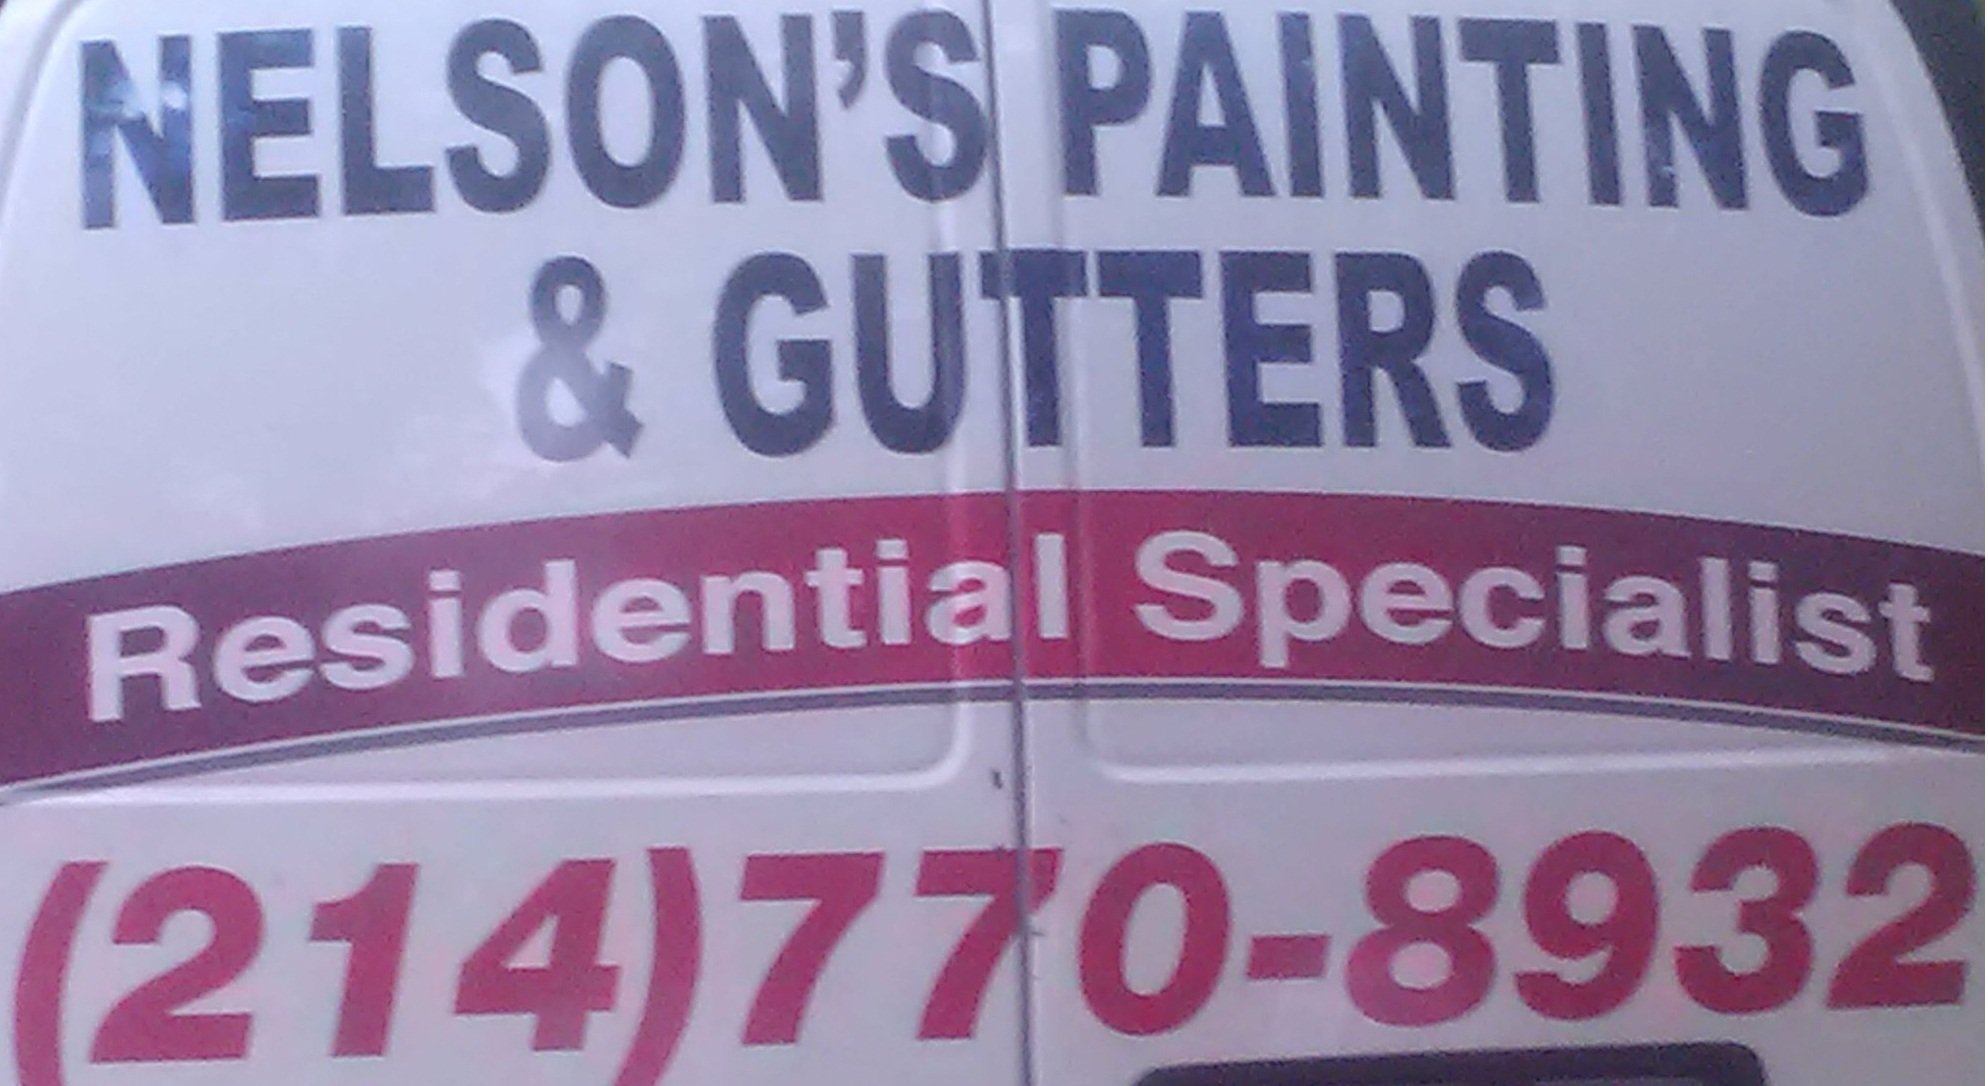 Nelson's Painting and Gutters Logo